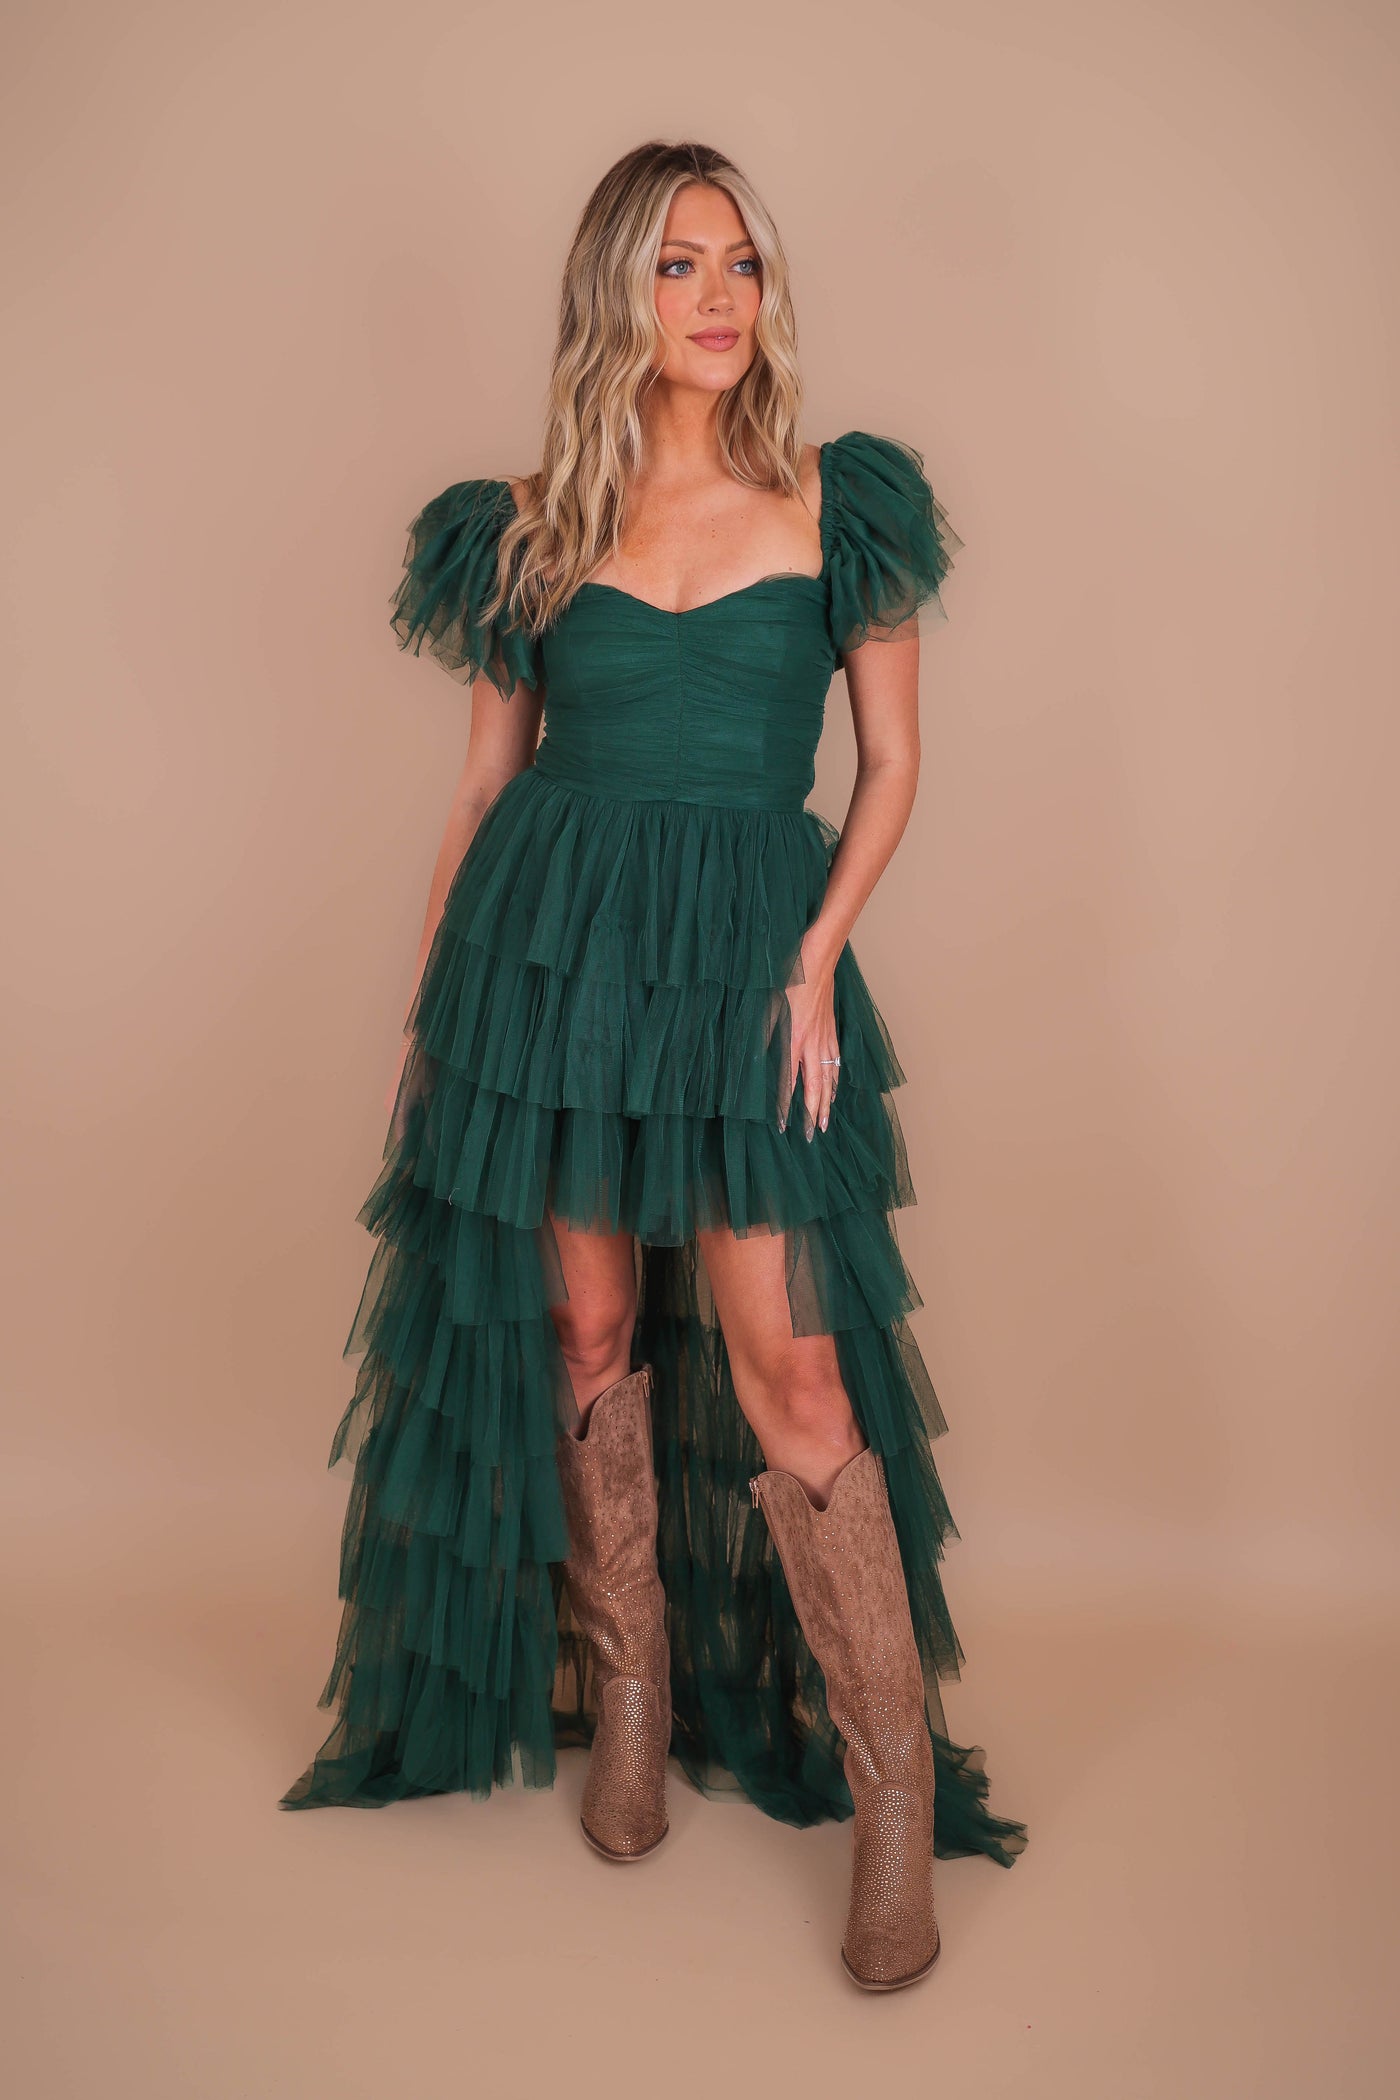 Women's Tulle Gown- Women's Green Tulle Maxi Dress- Luxxel Tulle Off The Shoulder Maxi 